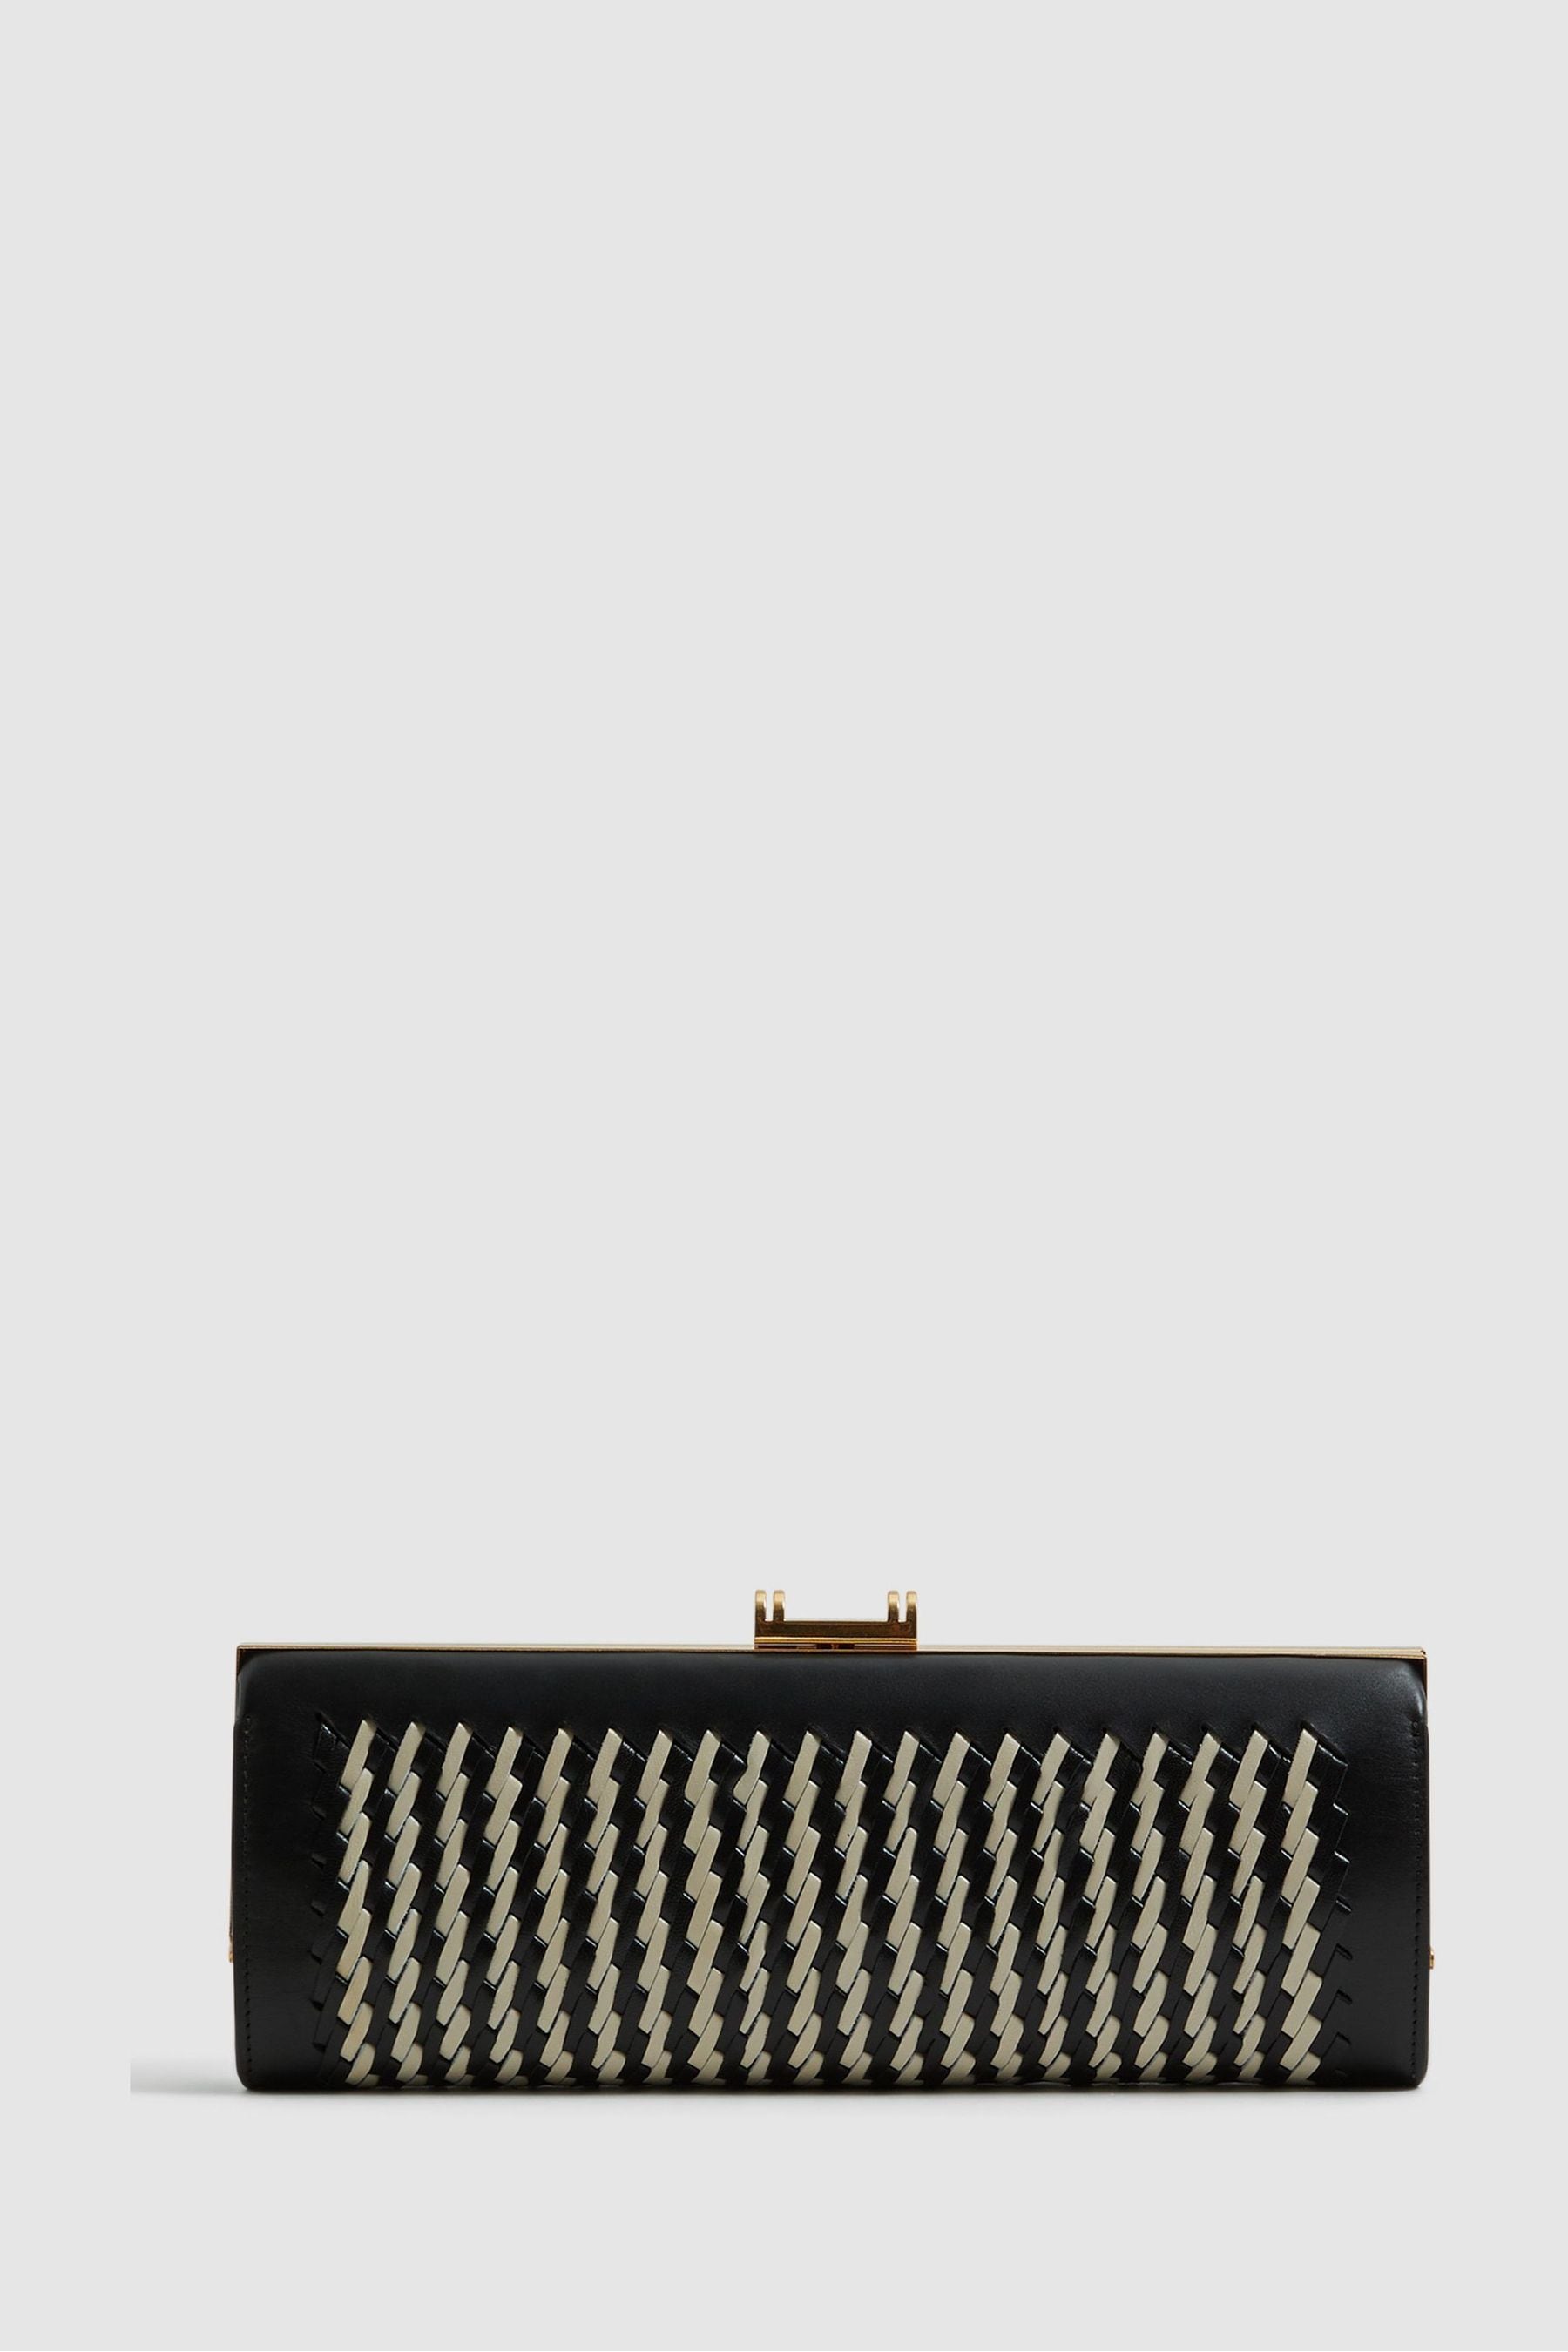 Reiss Grecia - Black/white Leather Woven Clutch Bag, One